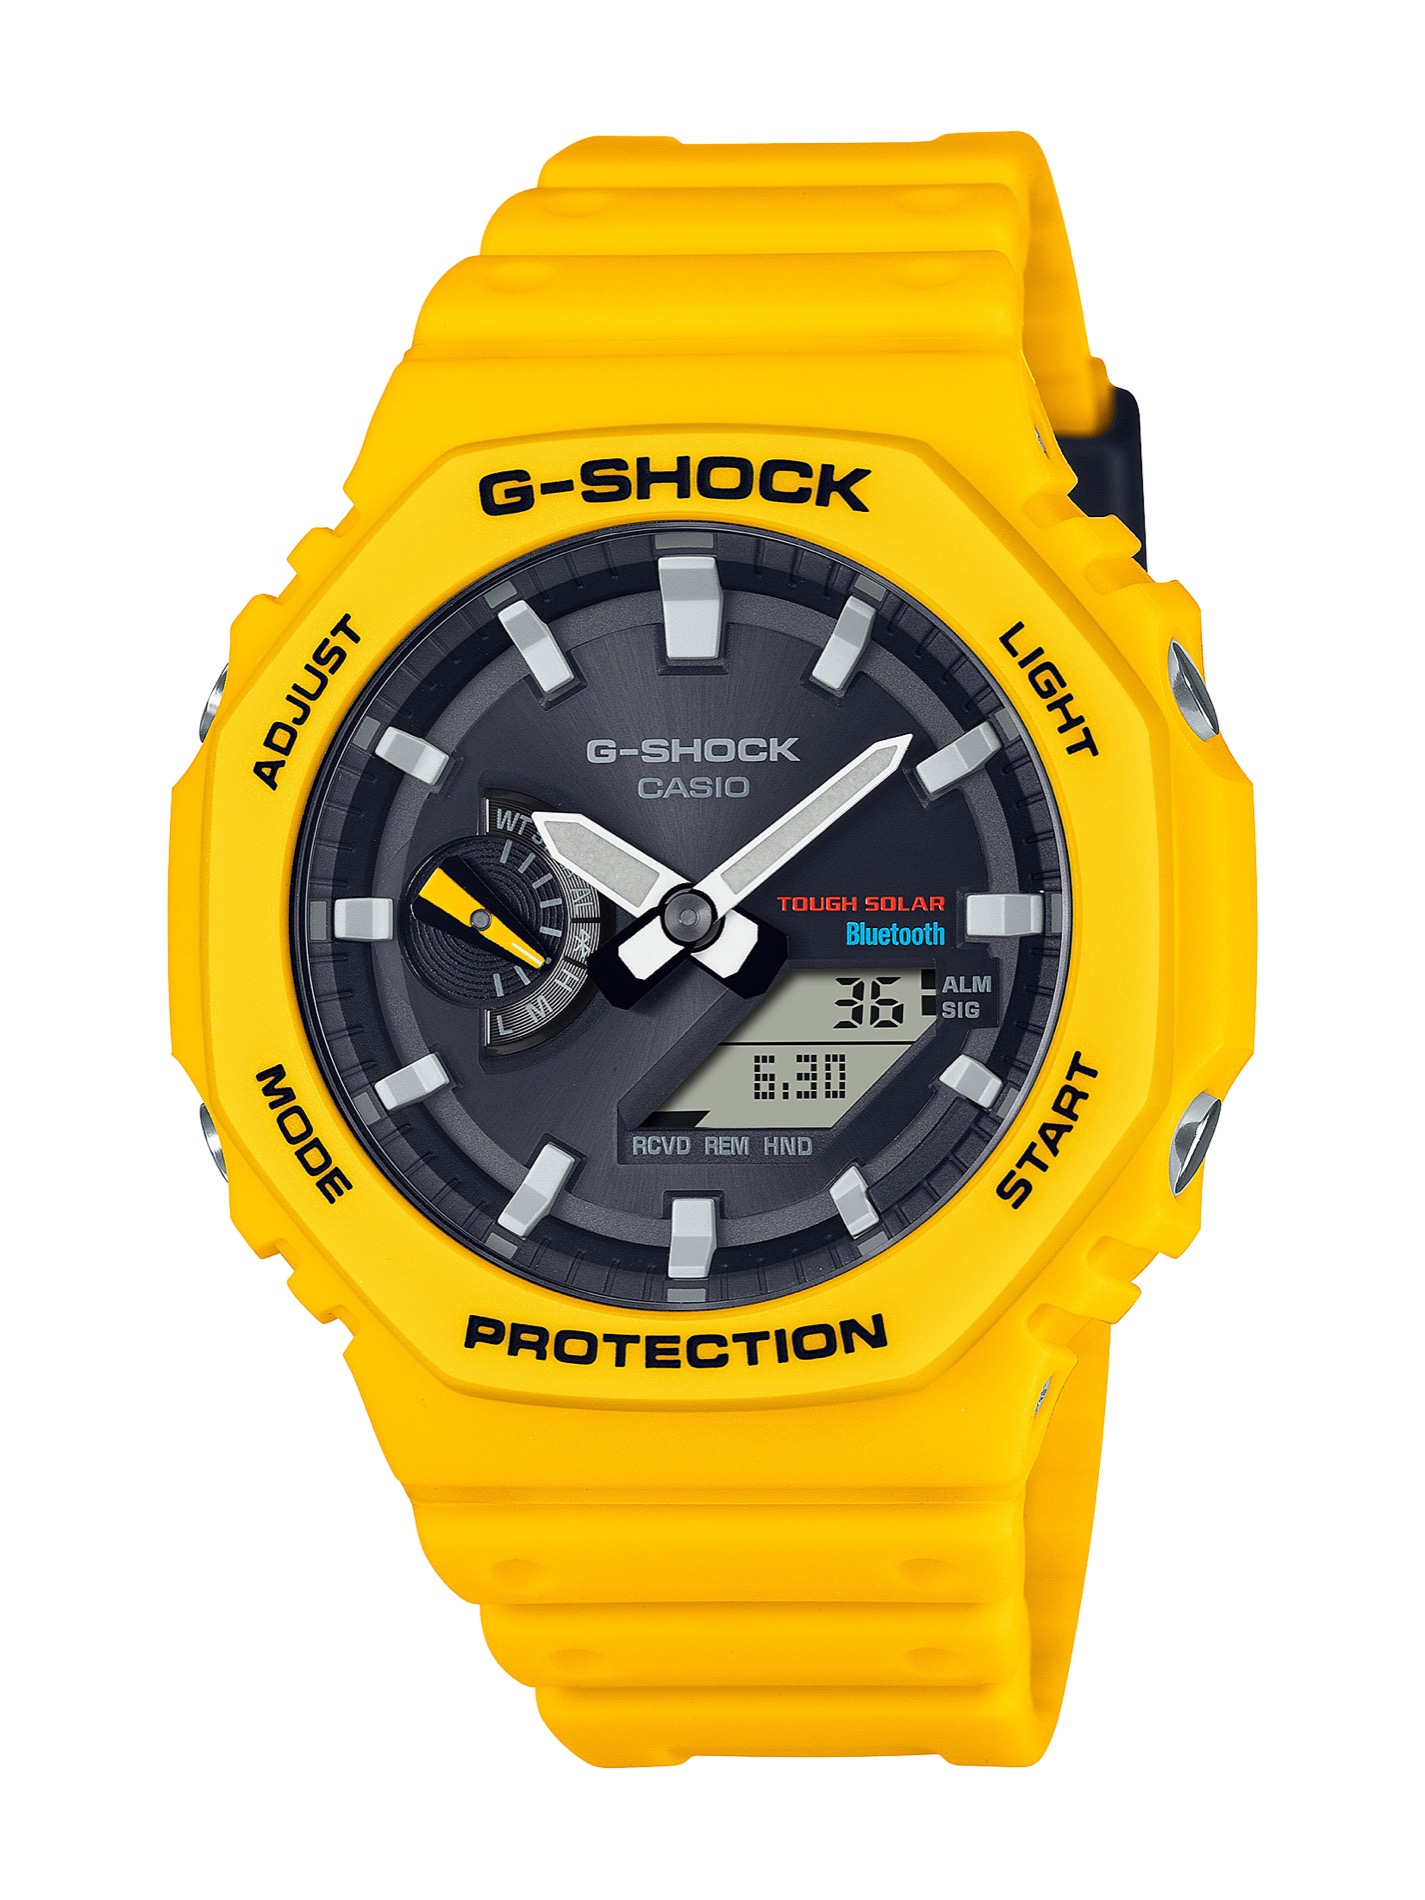 Recently Released: G-Shock GA-B2100 WristWatchReview 